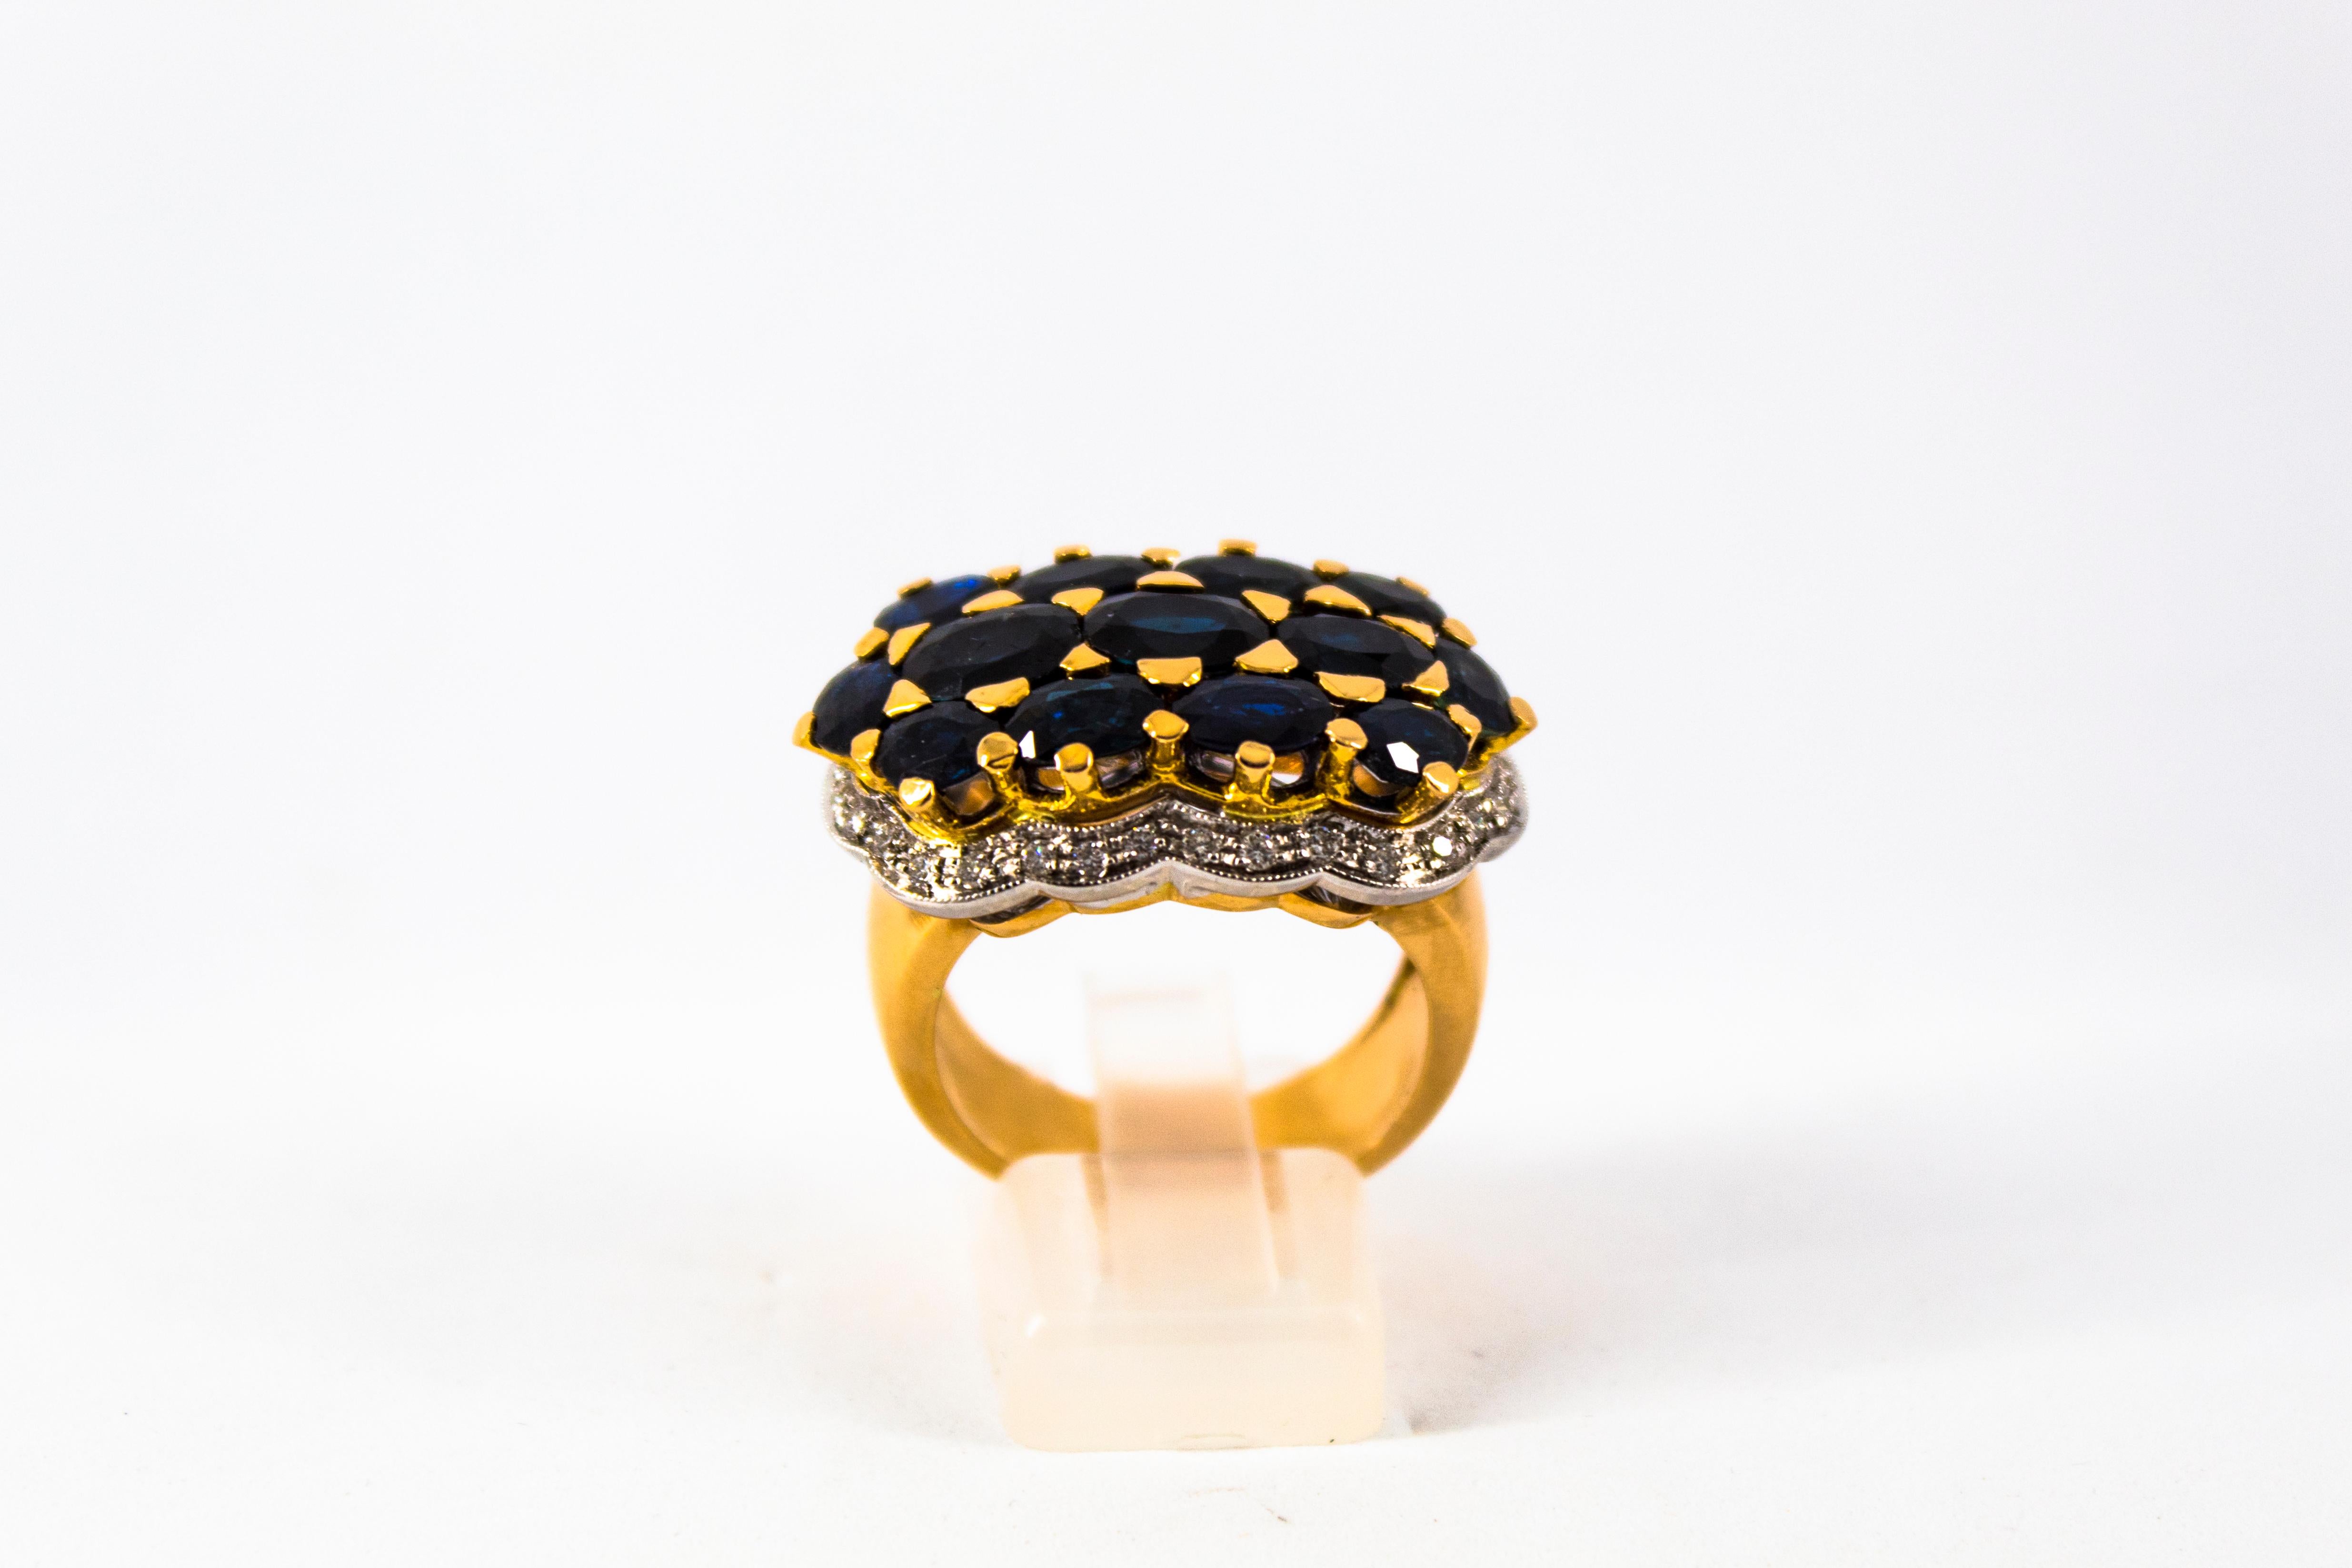 This Ring is made of 18K Yellow Gold.
This Ring has 0.50 Carats of White Diamonds.
This Ring has 8.10 Carats of Blue Sapphires.
Size ITA: 18.5 USA: 8.5
We're a workshop so every piece is handmade, customizable and resizable.